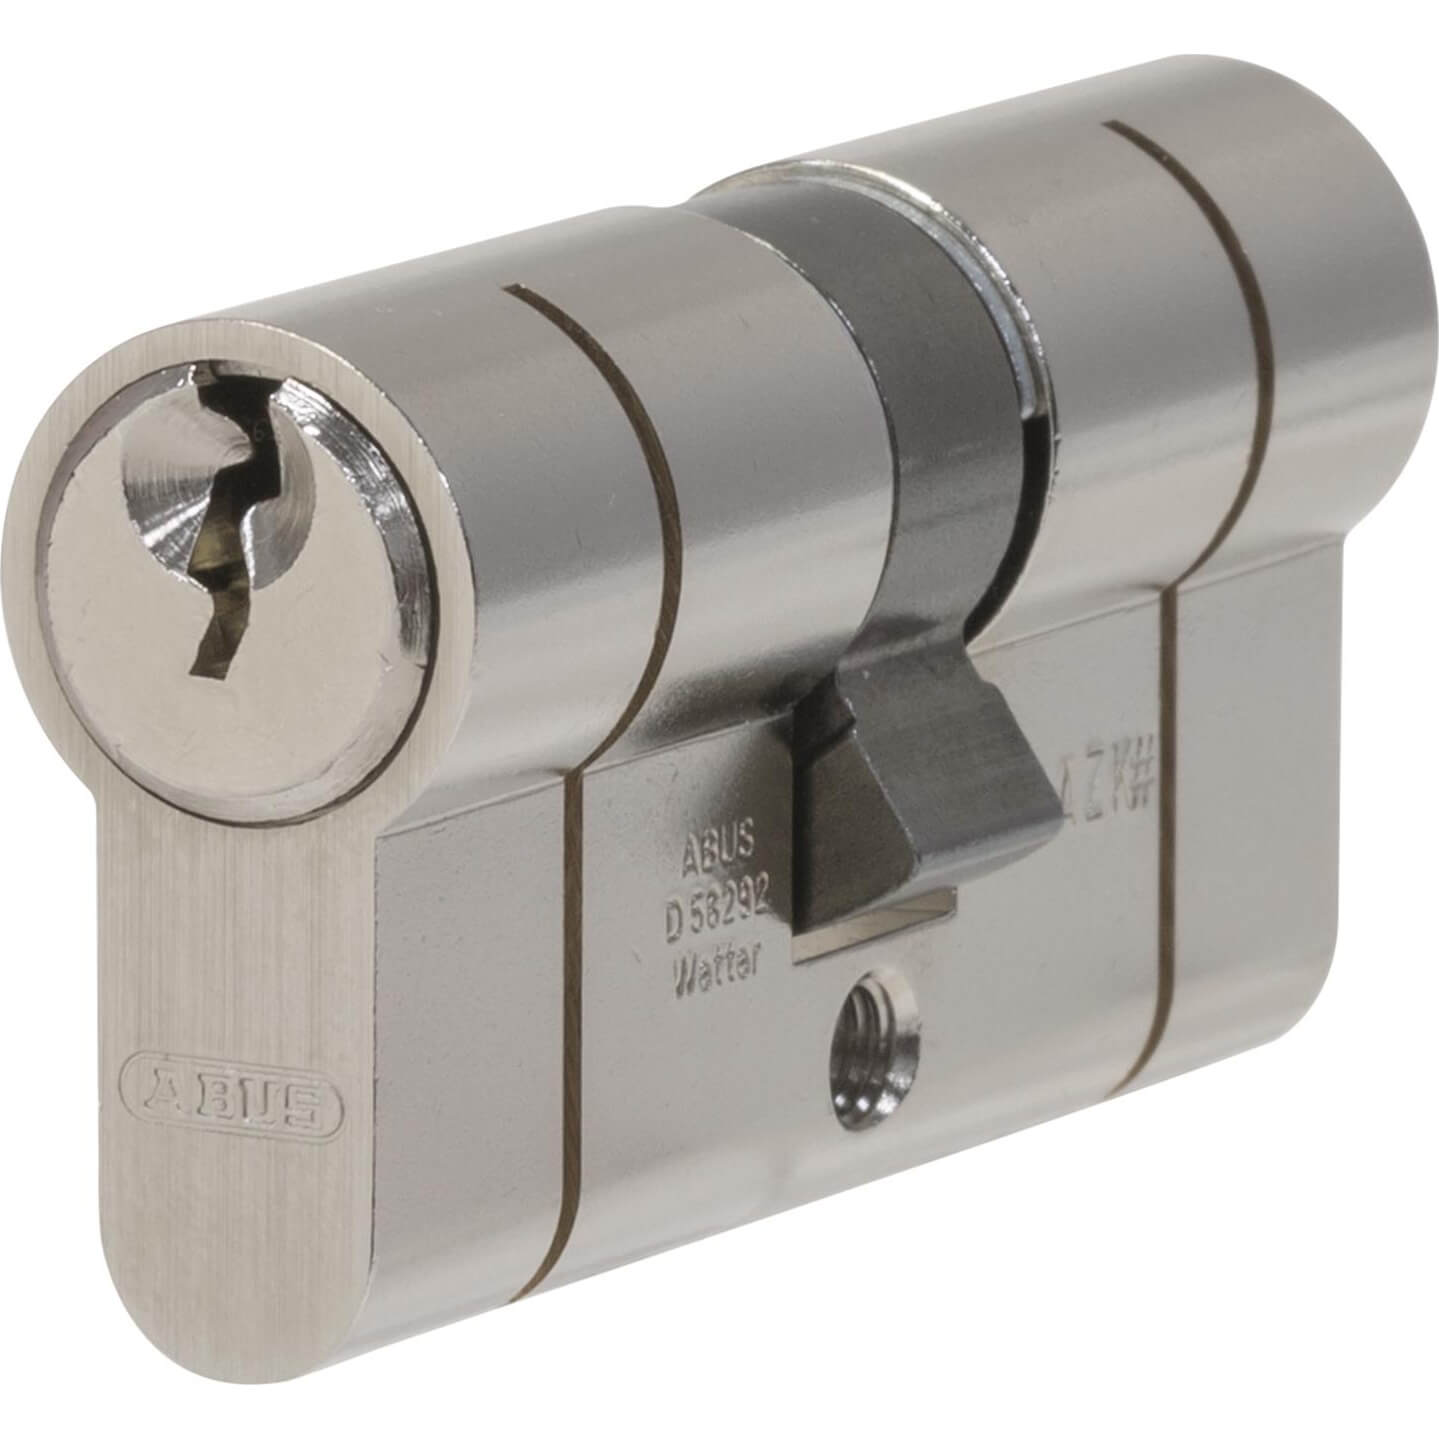 Abus E50PS Double Euro Cylinder Lock 70mm 35mm x 35mm Nickel